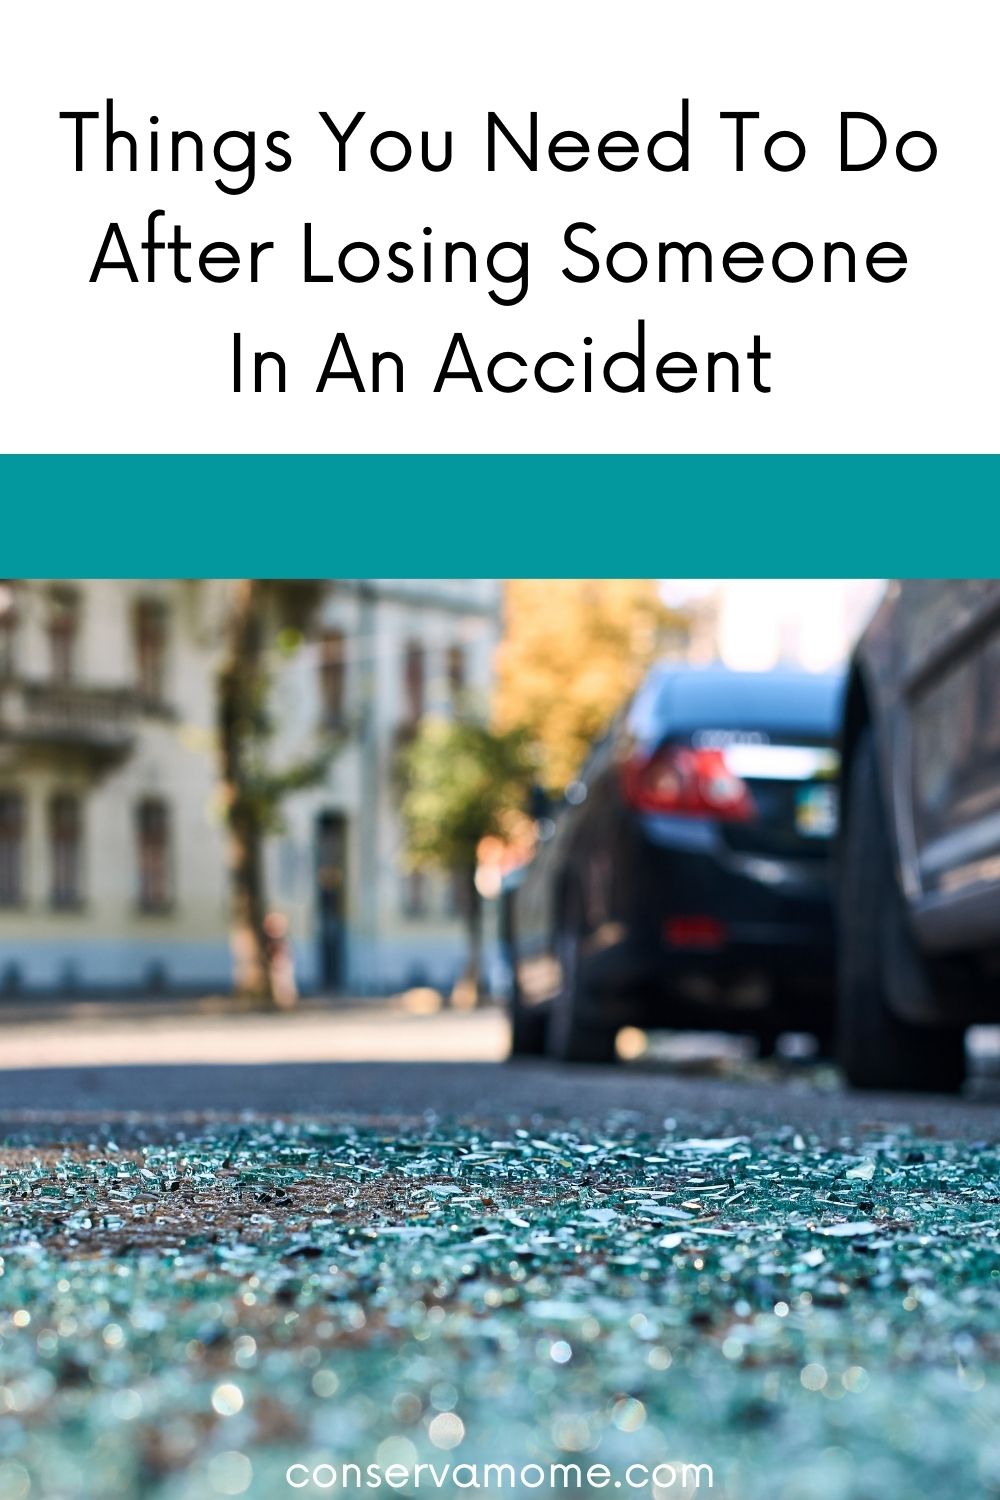 Things You Need To Do After Losing Someone In An Accident